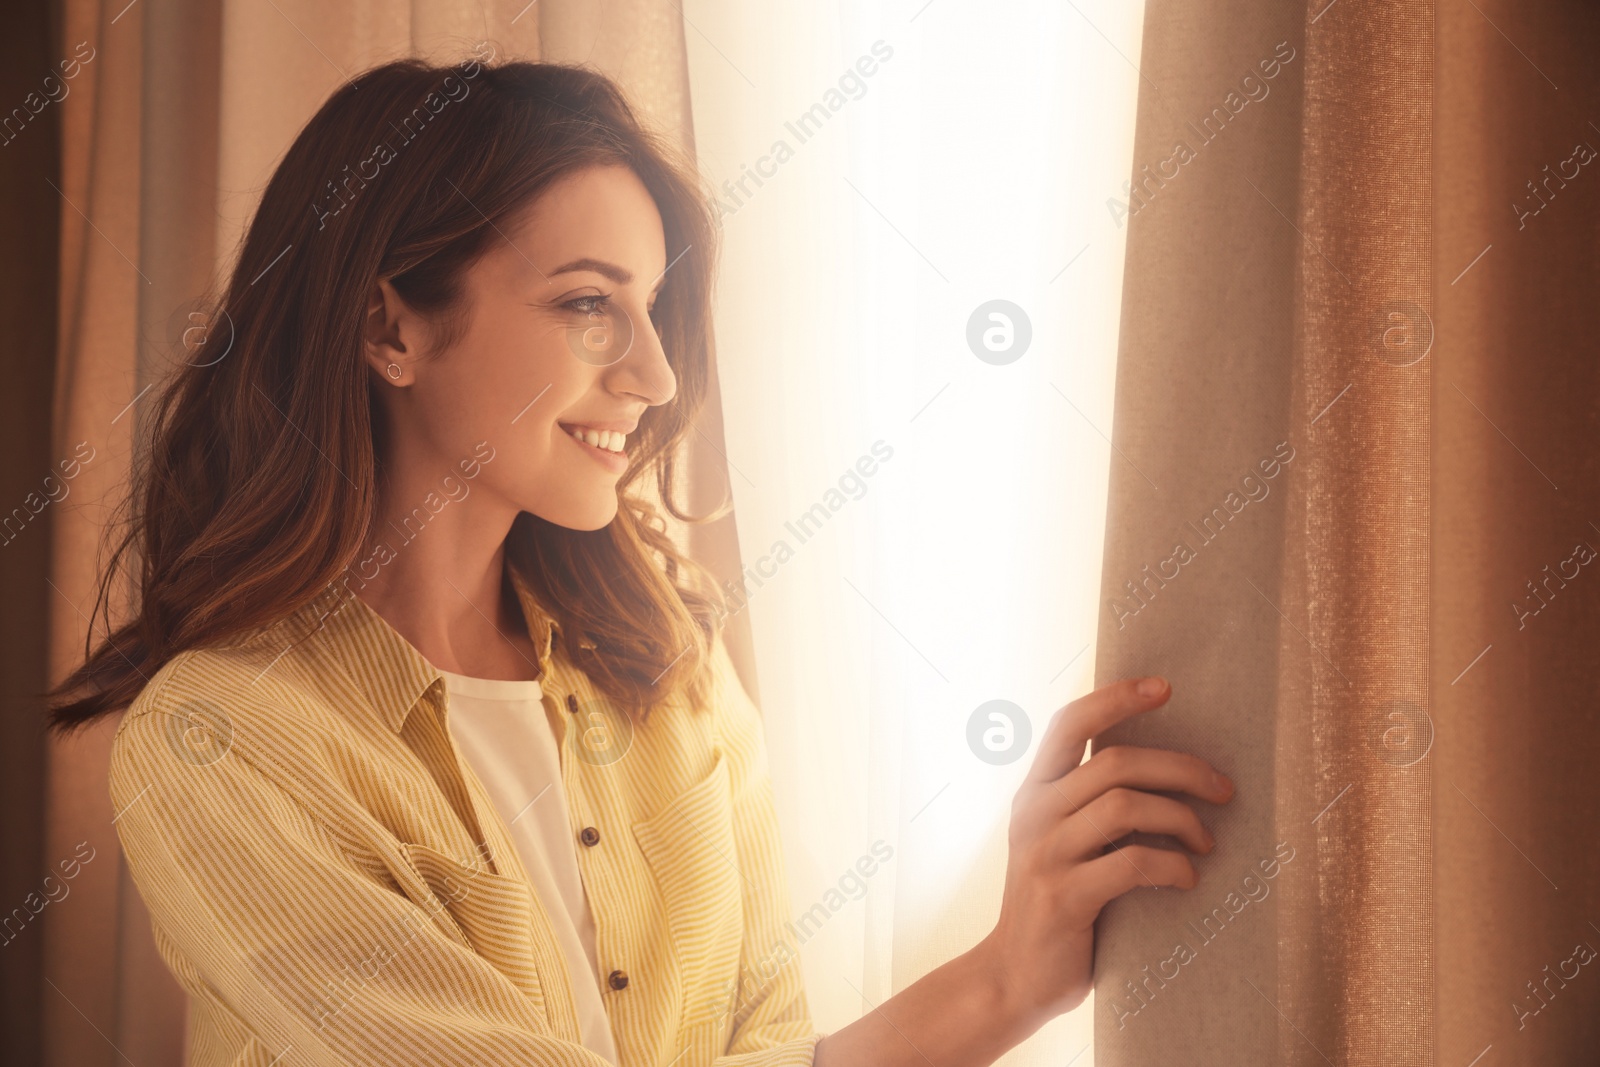 Image of Happy woman opening window curtains at home